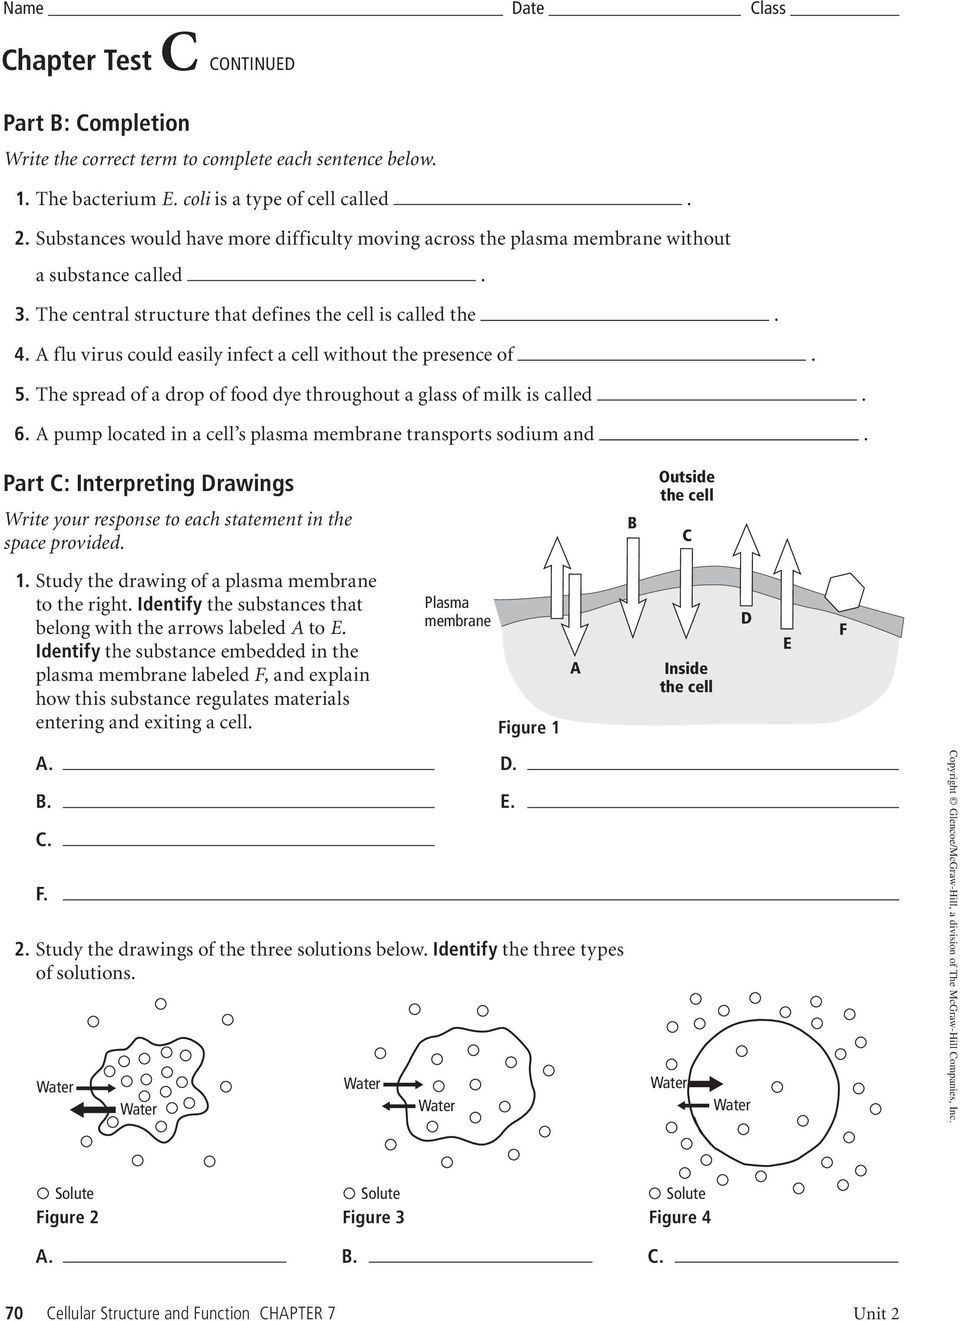 Cell Membrane Images Worksheet Answers Chapter 7 Section 2 the Plasma Membrane Worksheet Answers